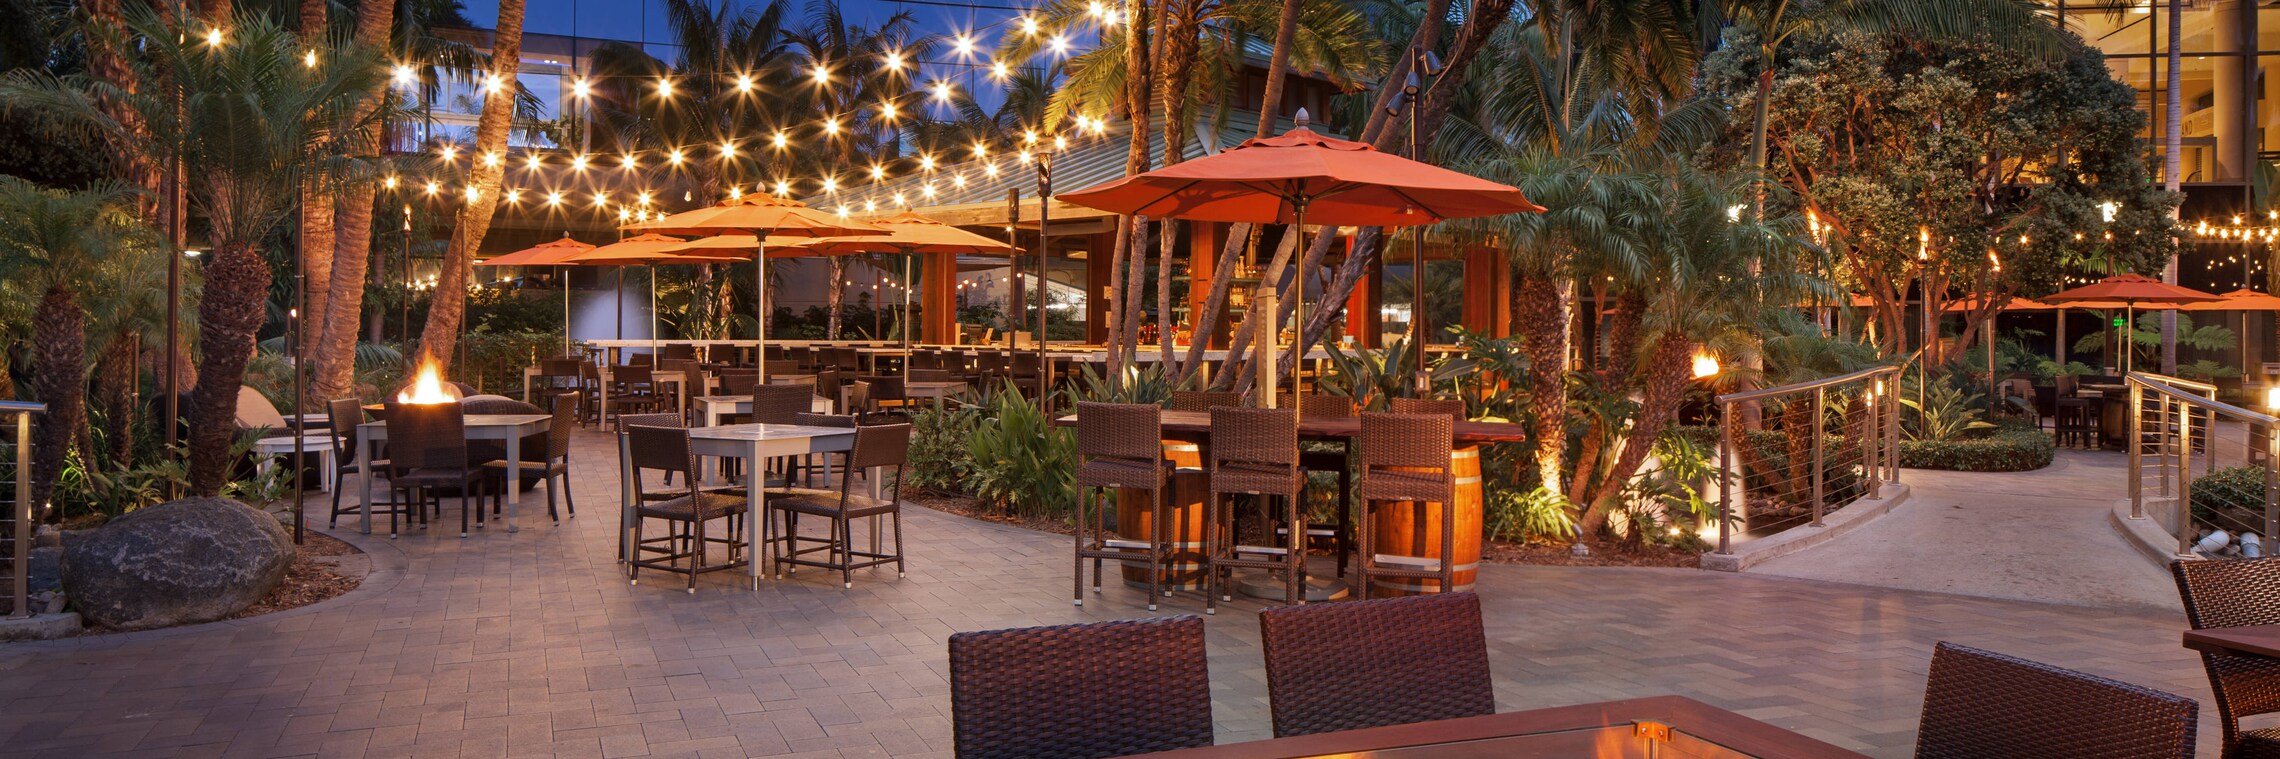 Tequila Bar & Grille – Outdoor Seating & Fire Pit